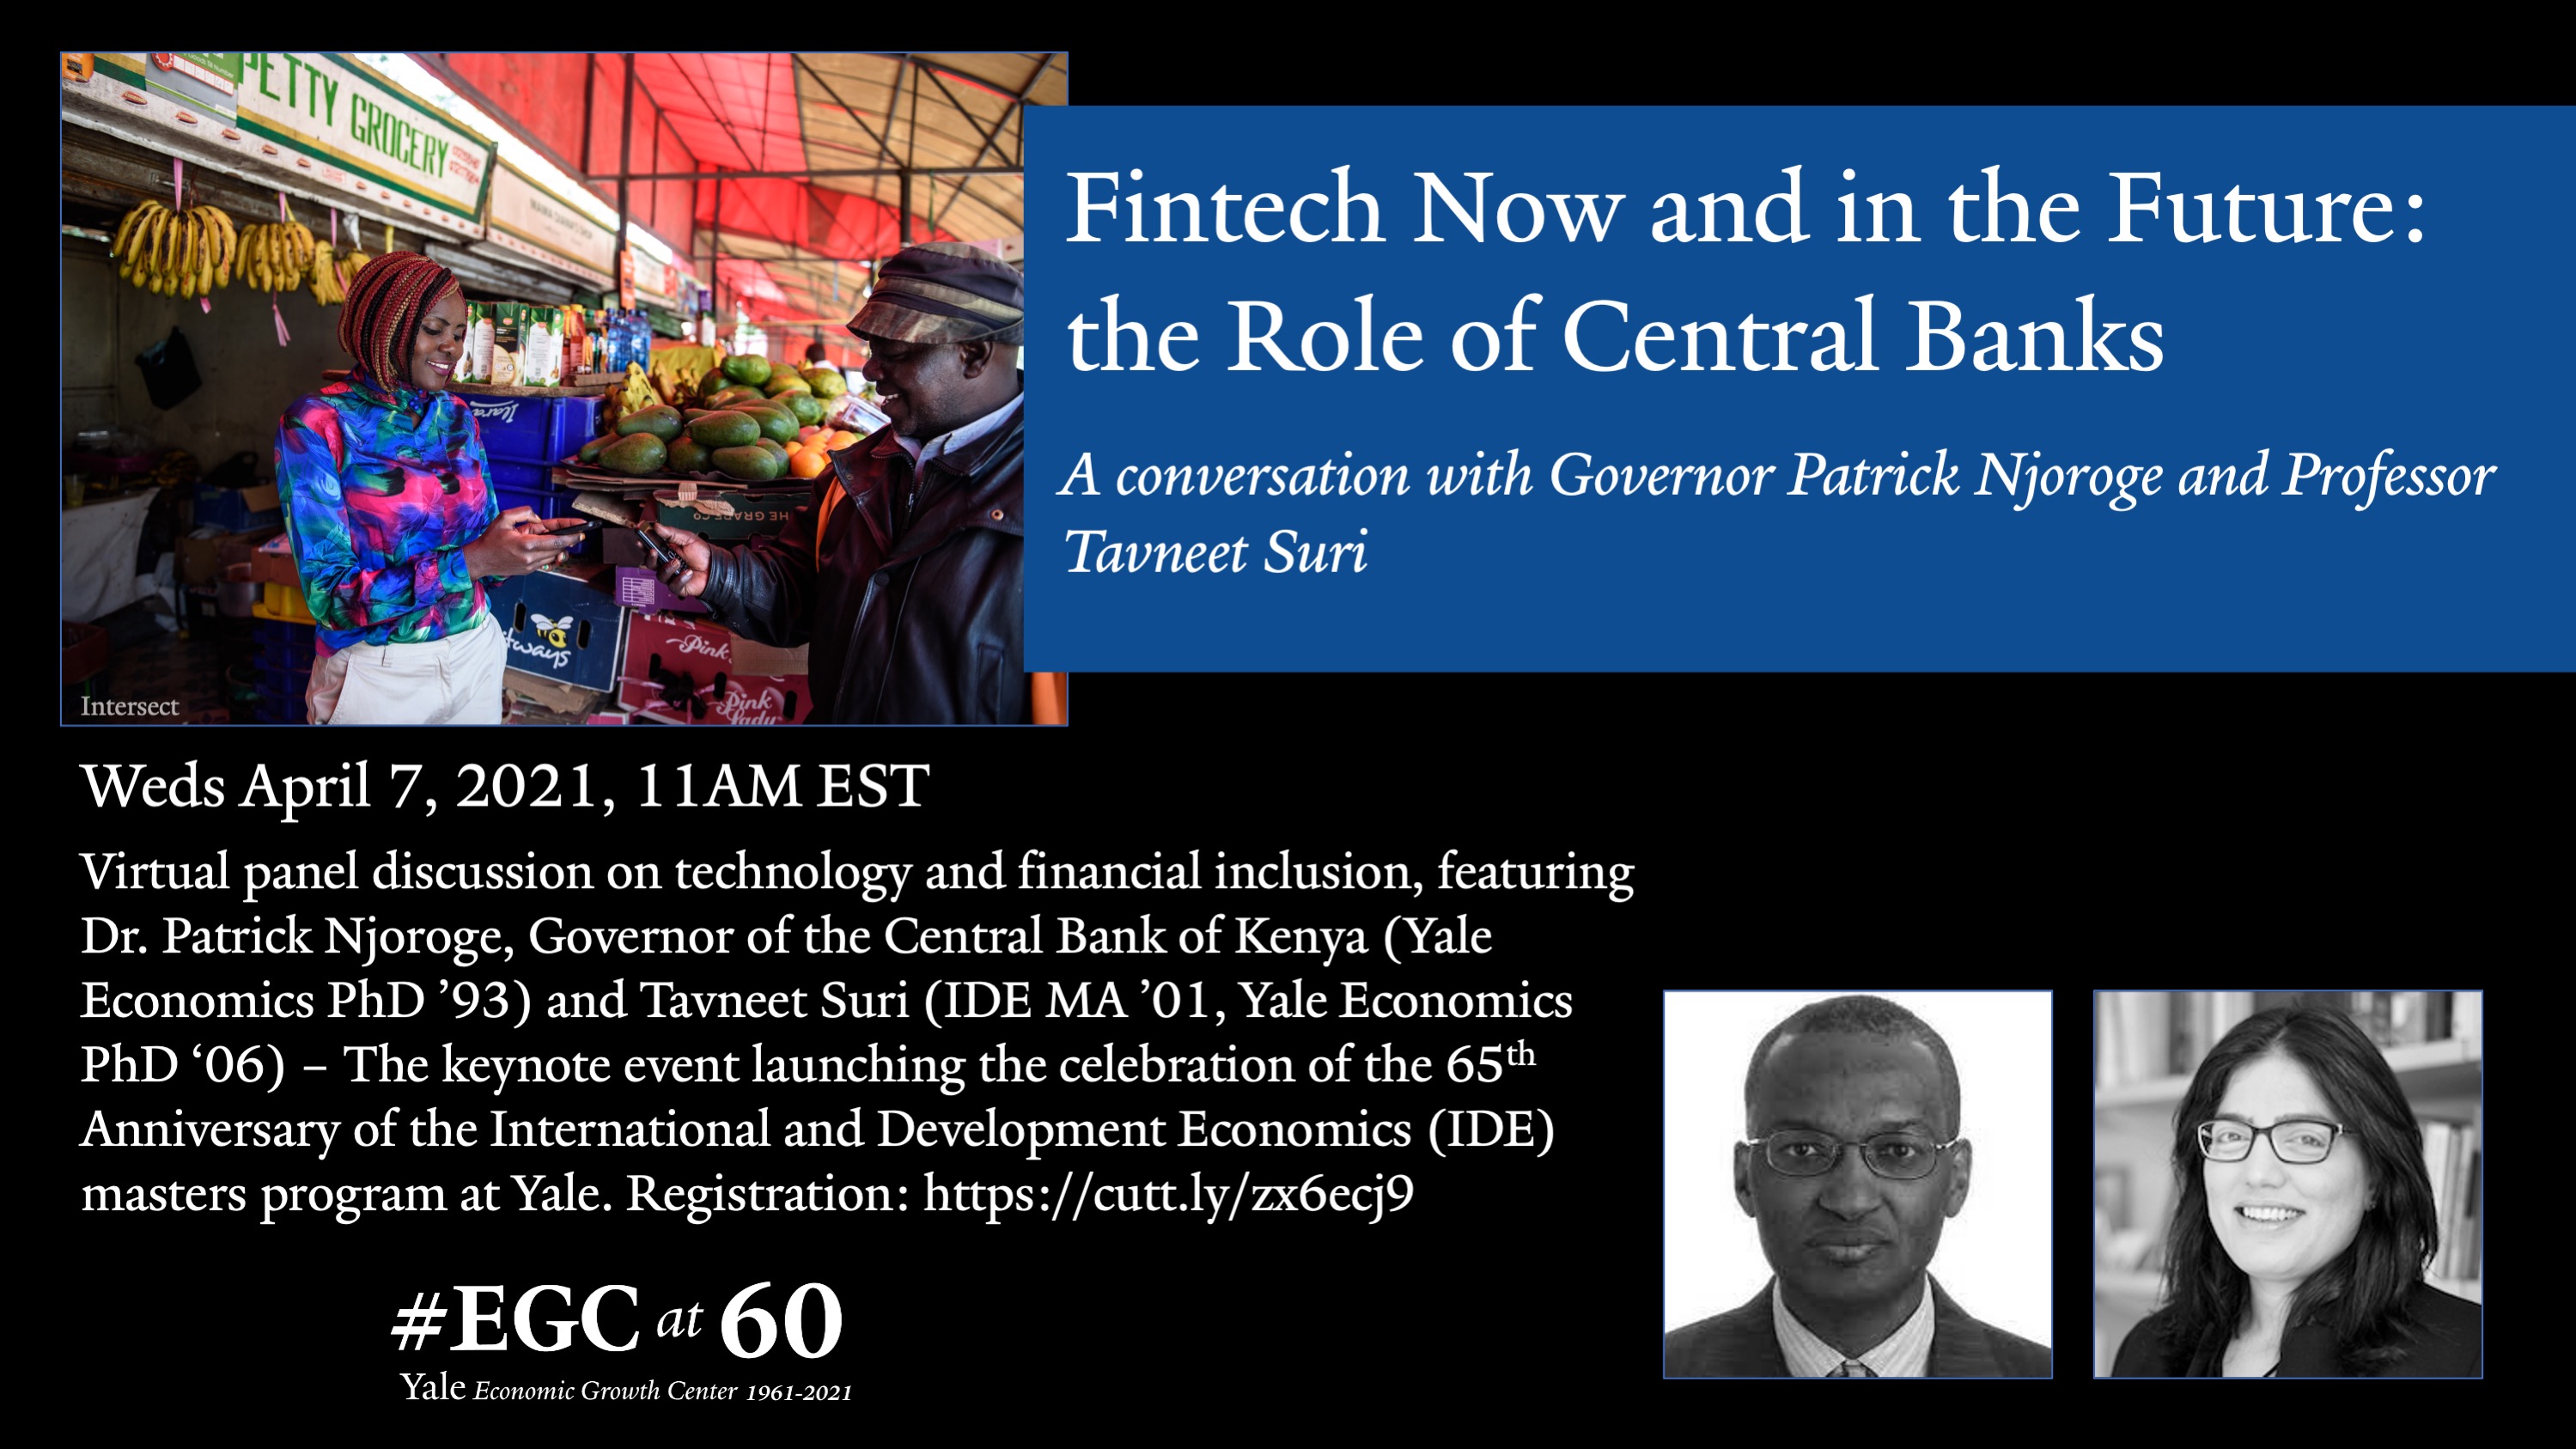 Fintech Now and in the Future: the Role of Central Banks lecture on April 7 at 11am EDT